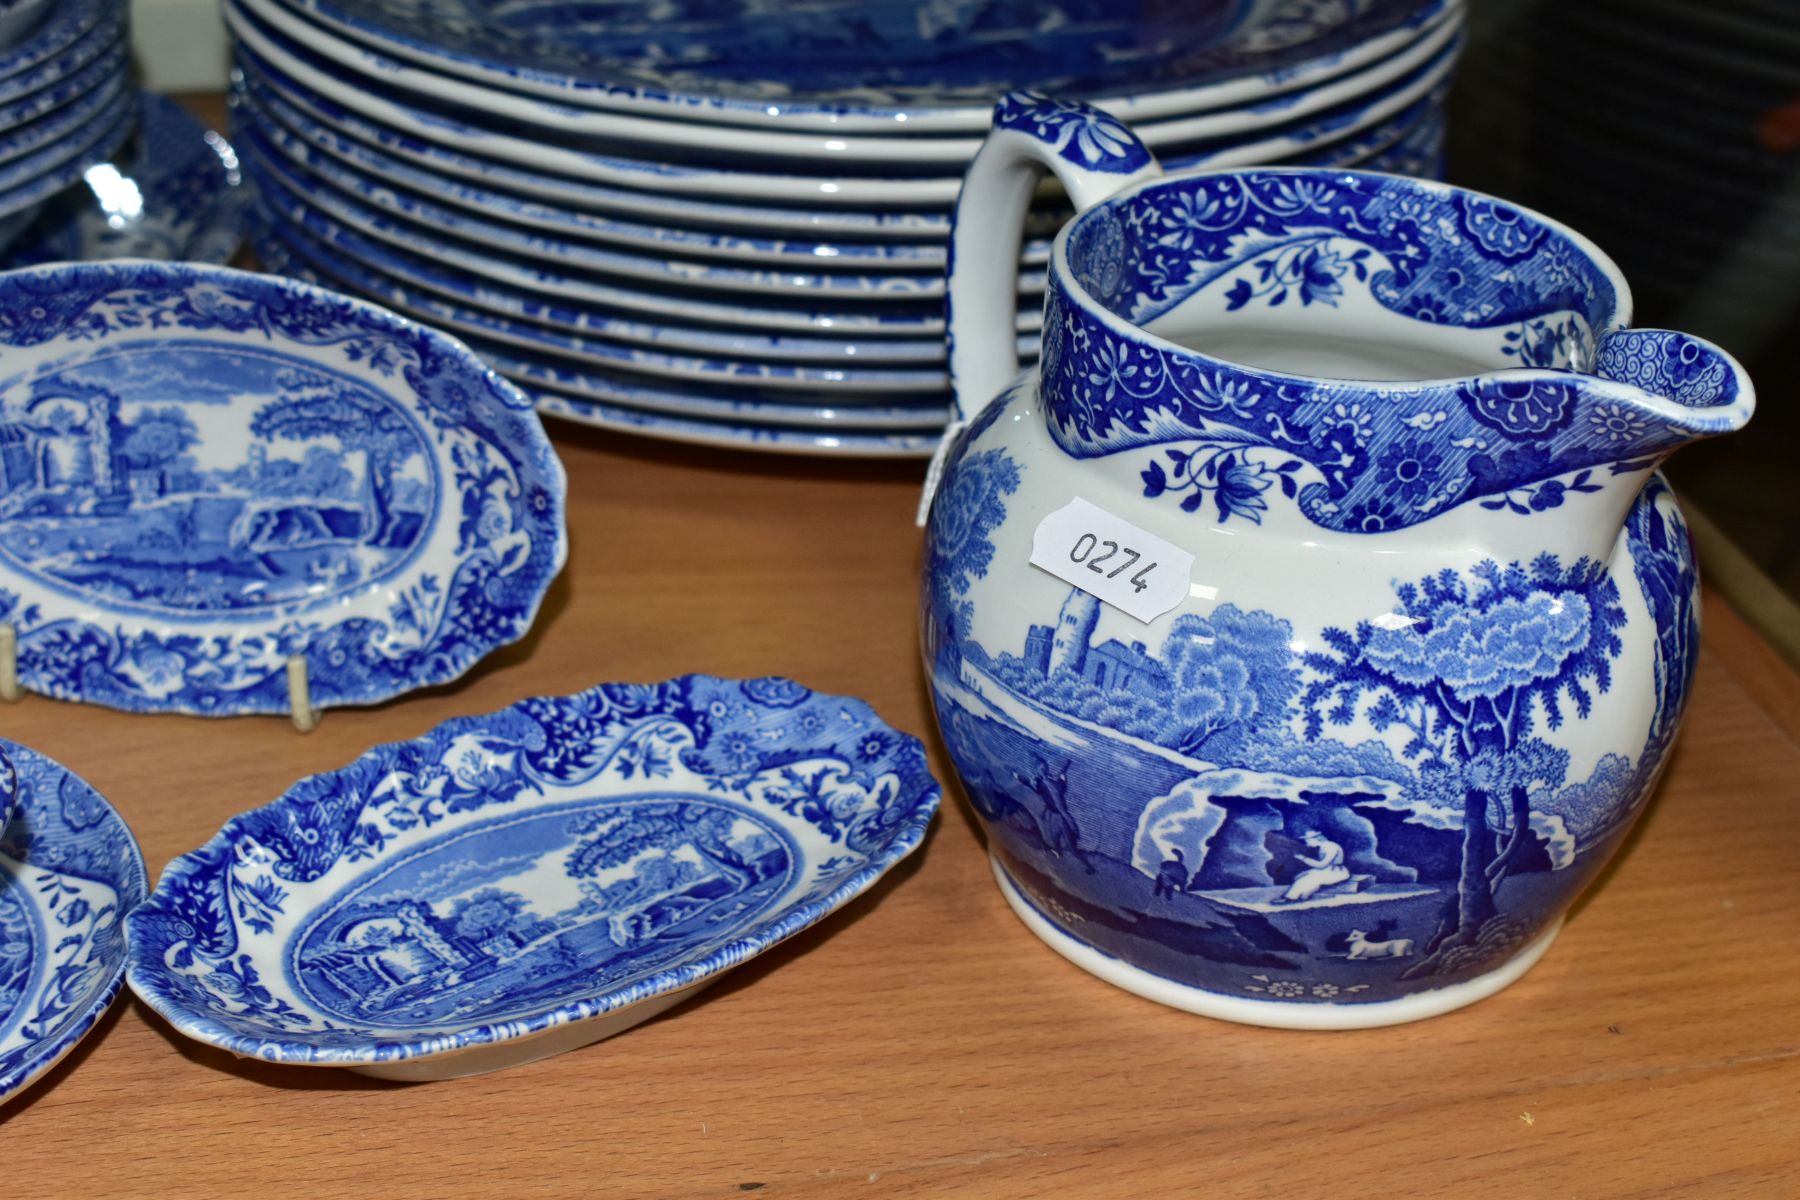 A QUANTITY OF MODERN SPODE ITALIAN SPODE DESIGN DINNER WARES, comprising an 11cm high jug, two small - Image 9 of 10